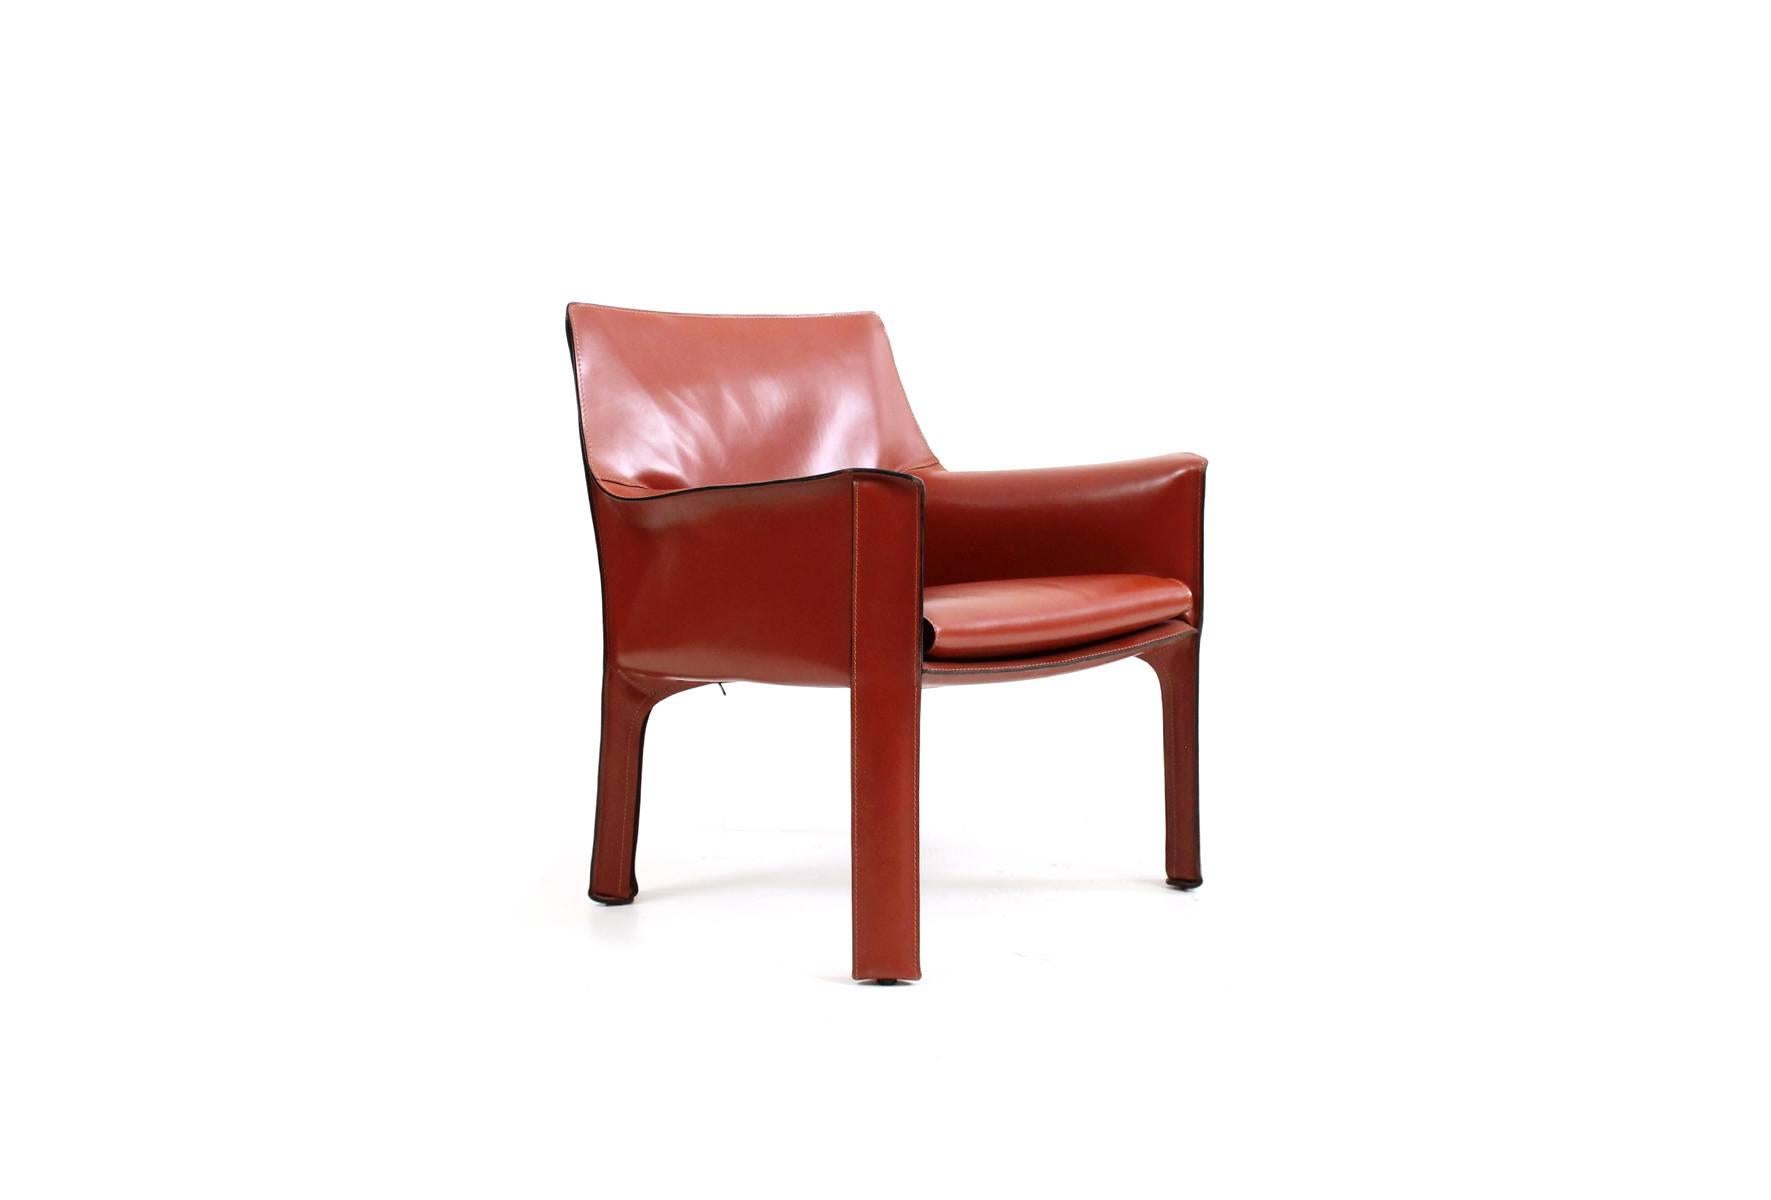 A cab lounge chair by Italian designer Mario Bellini for Cassina. This vintage chair in near perfect condition is in a desirable red orange belting leather. Branded to underside and decking.